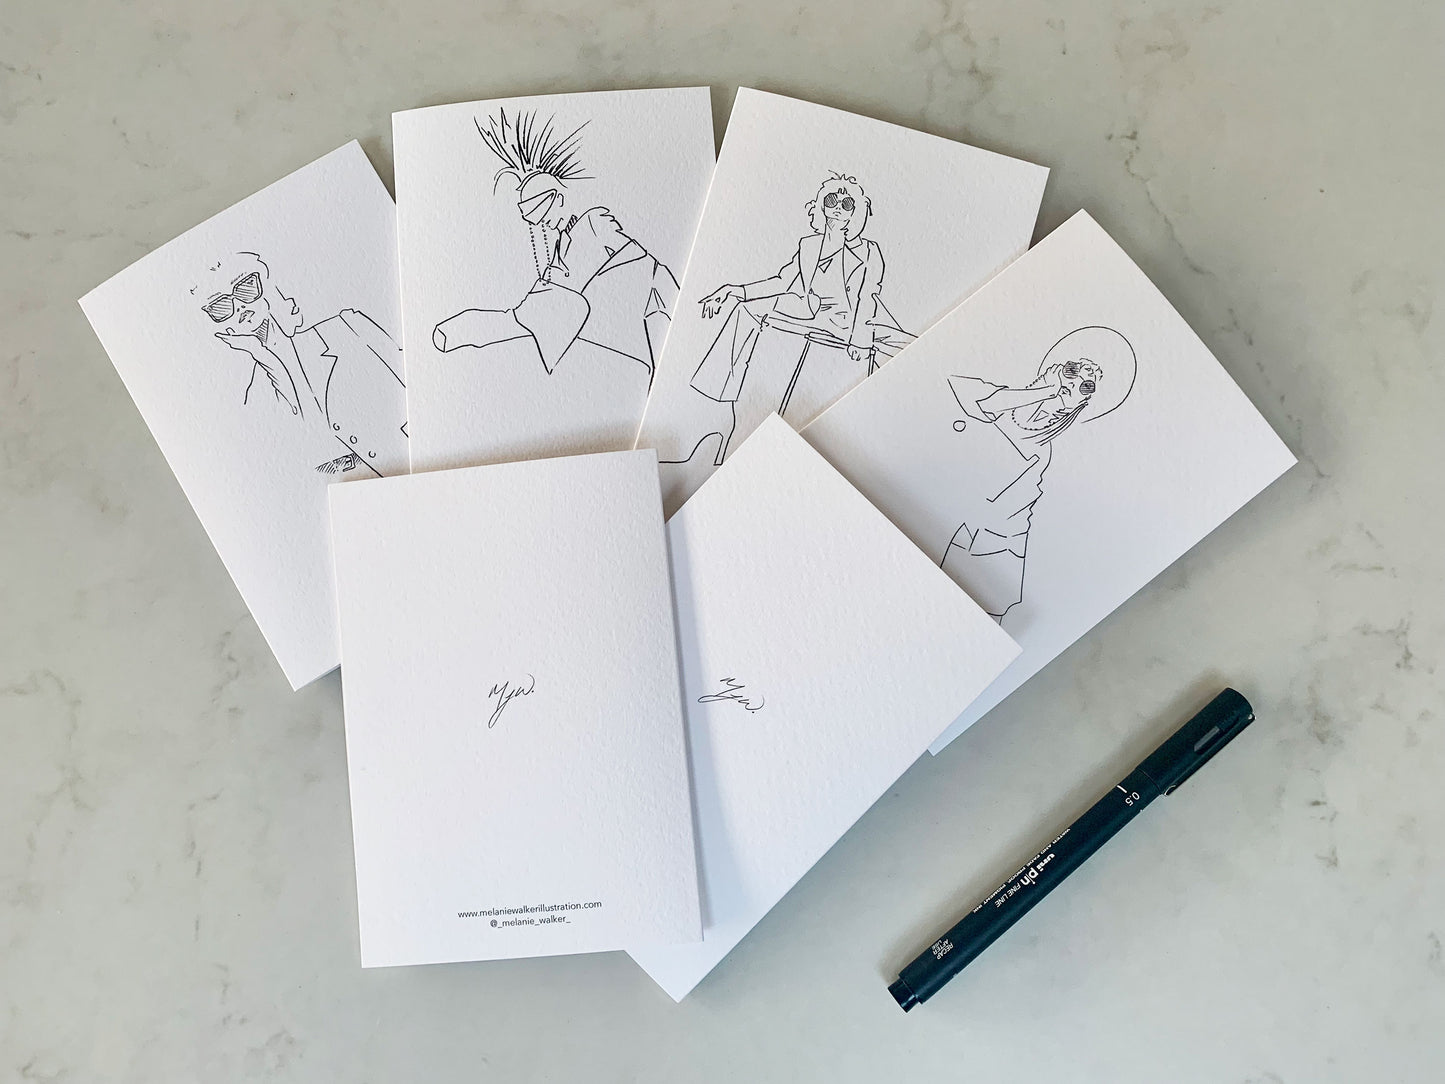 Set of 6 greeting cards with illustrations by fashion designer Melanie Walker.